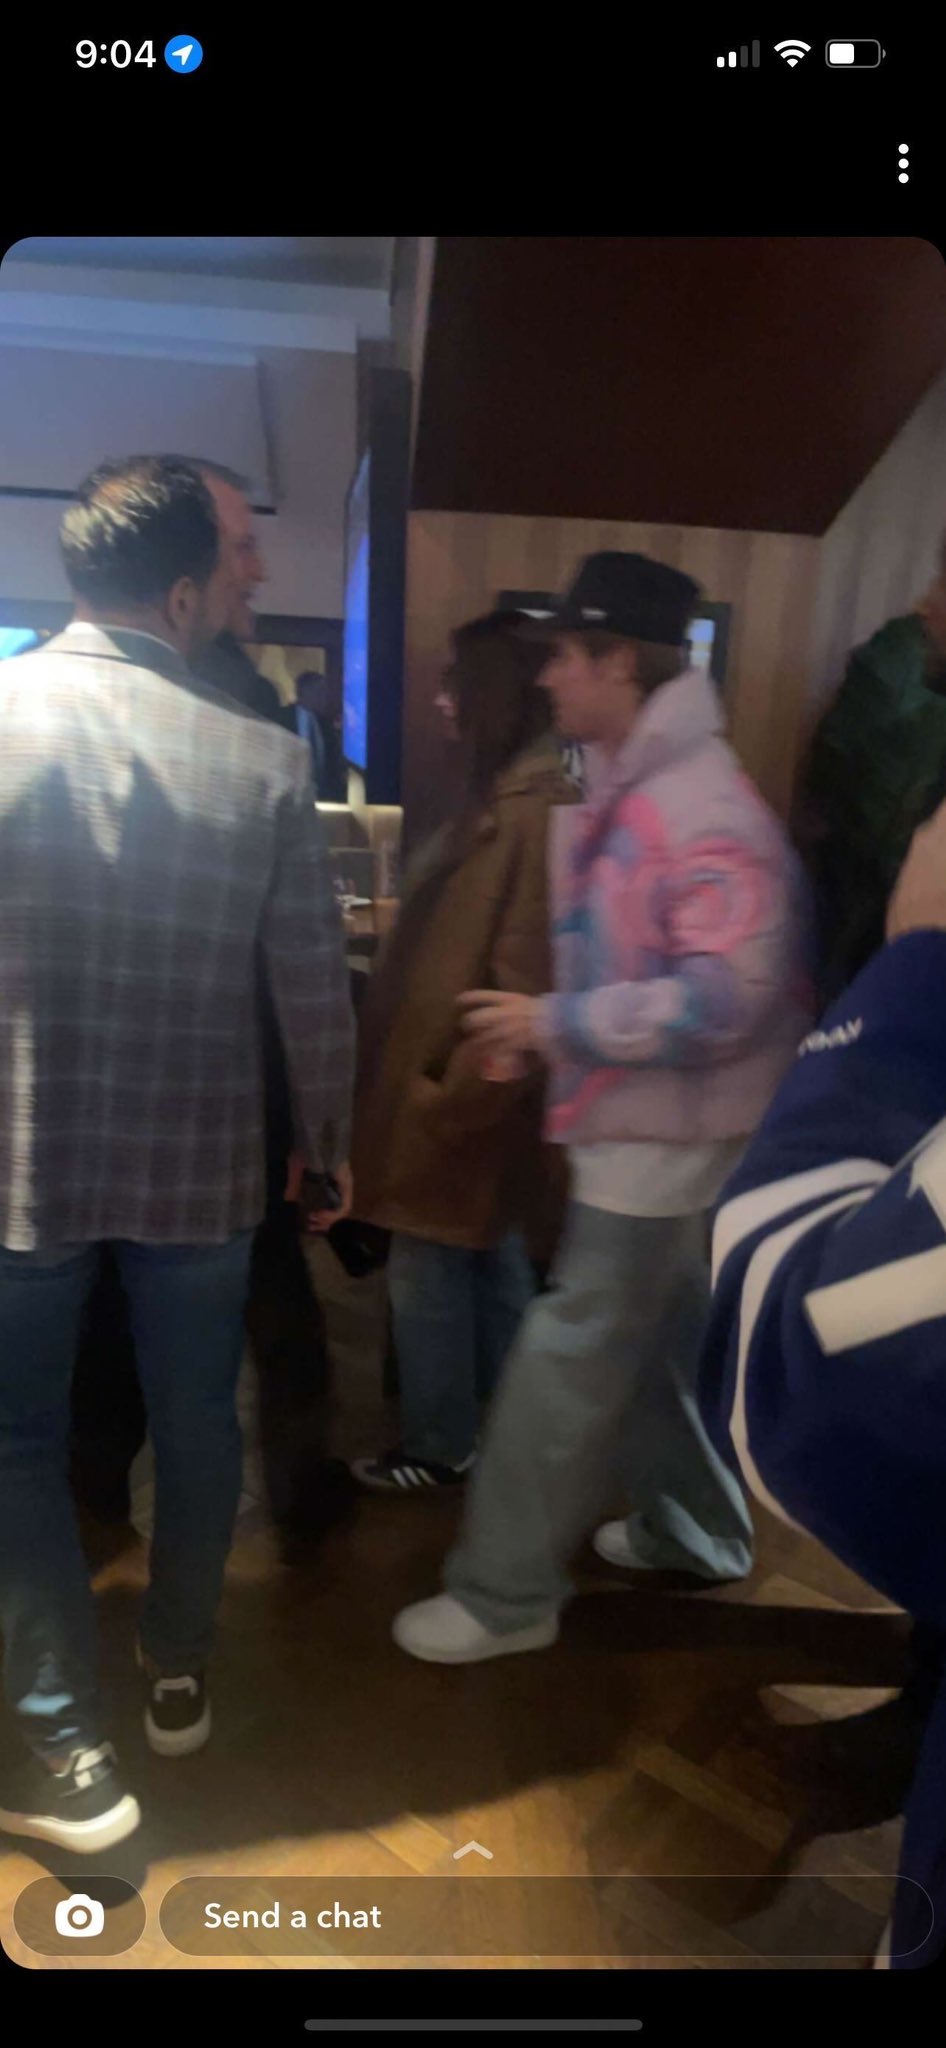 Justin Bieber News on X: Justin Bieber and Hailey Bieber at the Toronto  Maple Leafs VS Kings hockey game at the ScotiaBank Arena in Toronto,Ontario  (December 8)  / X